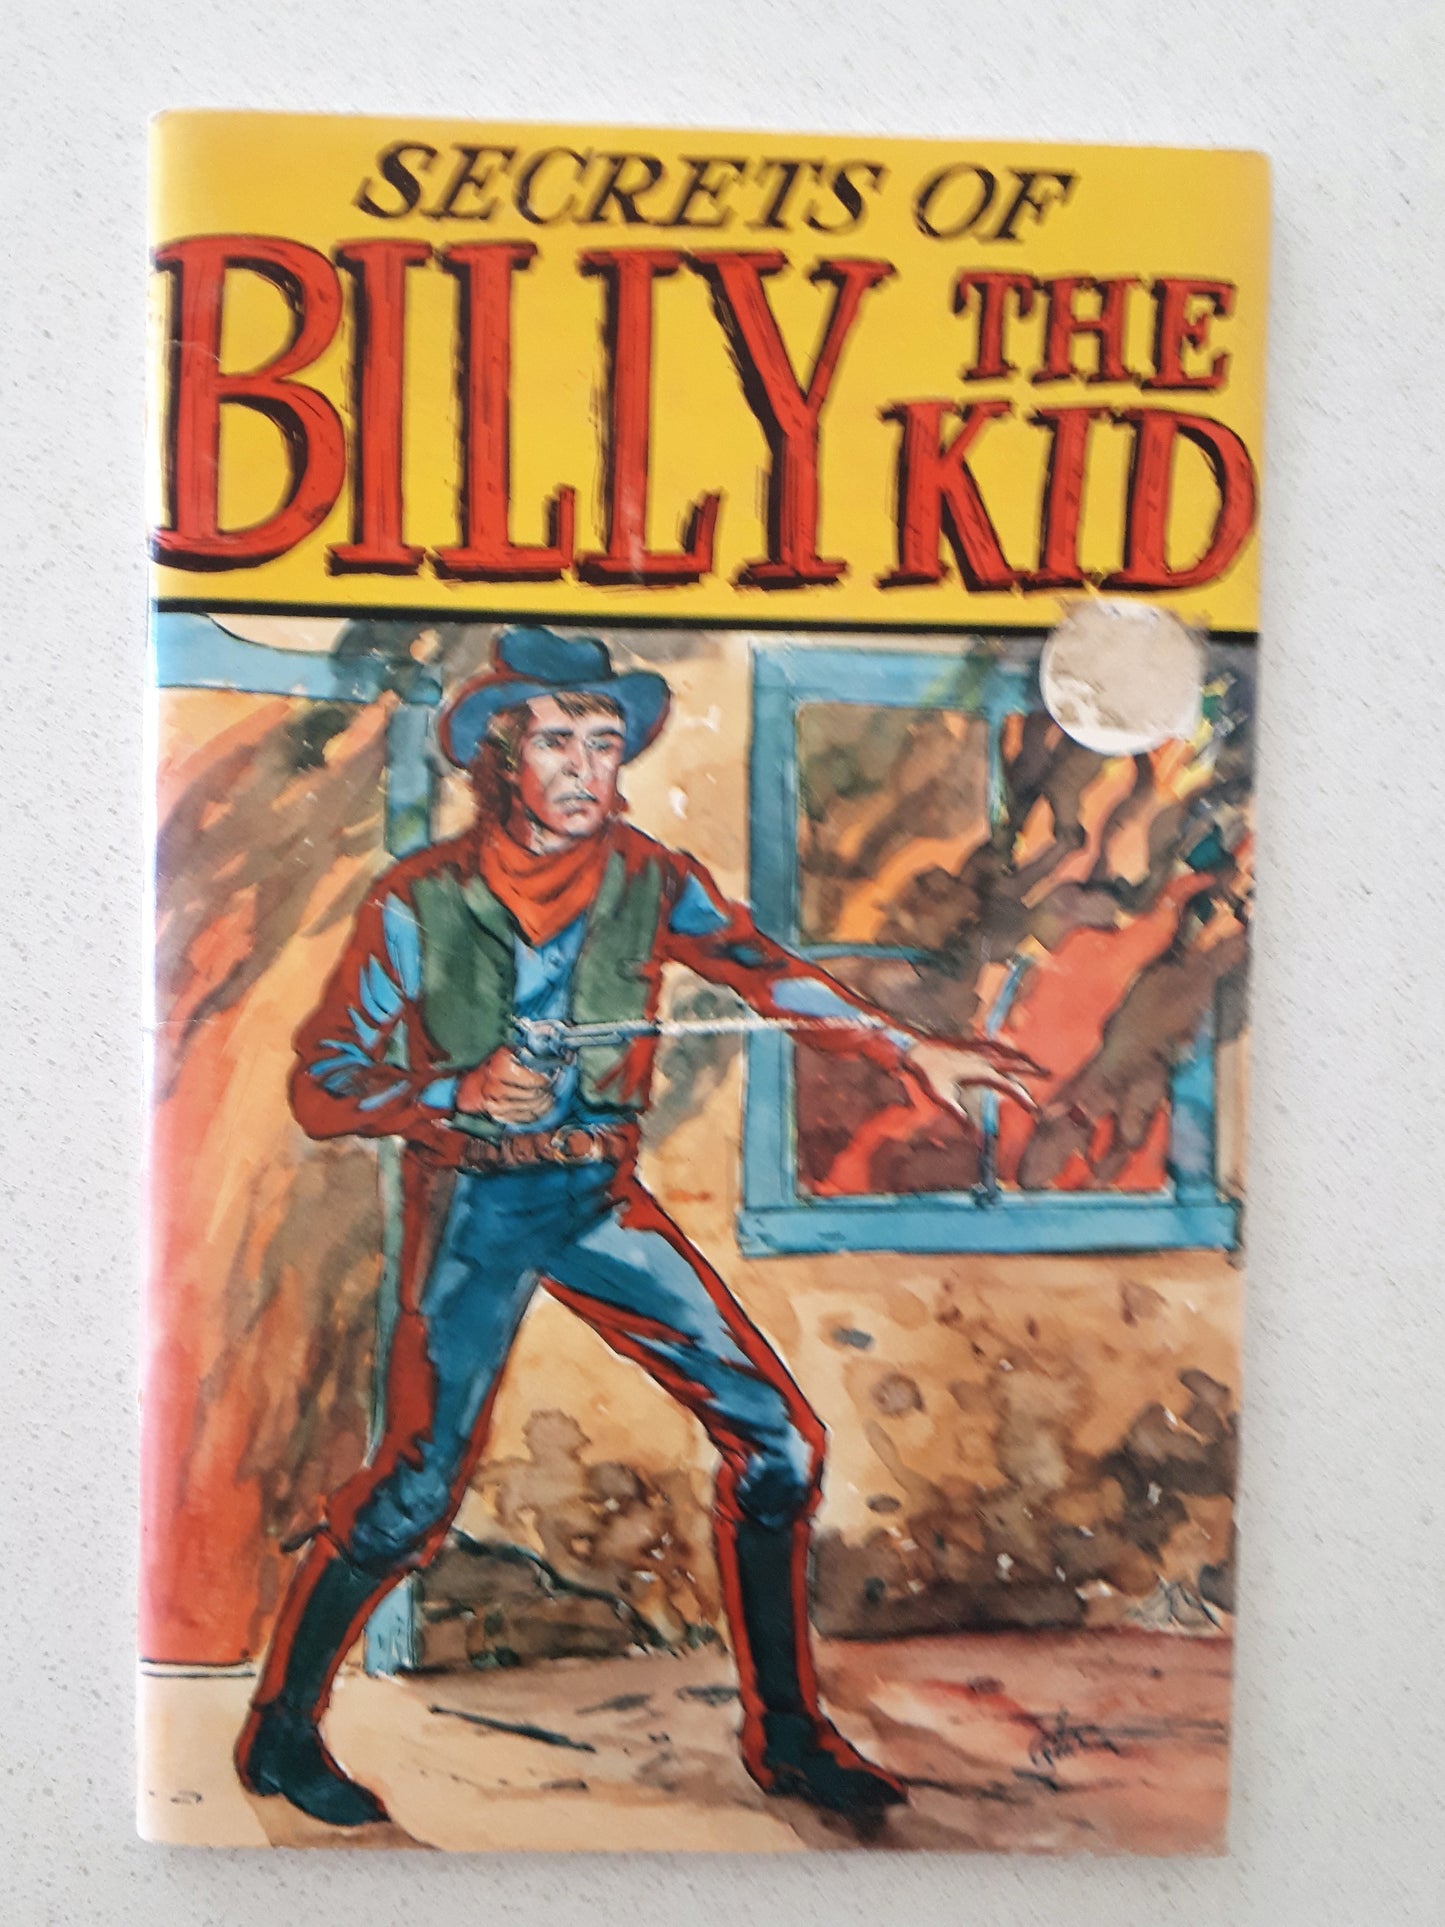 Secrets of Billy The Kid by George E. Turner